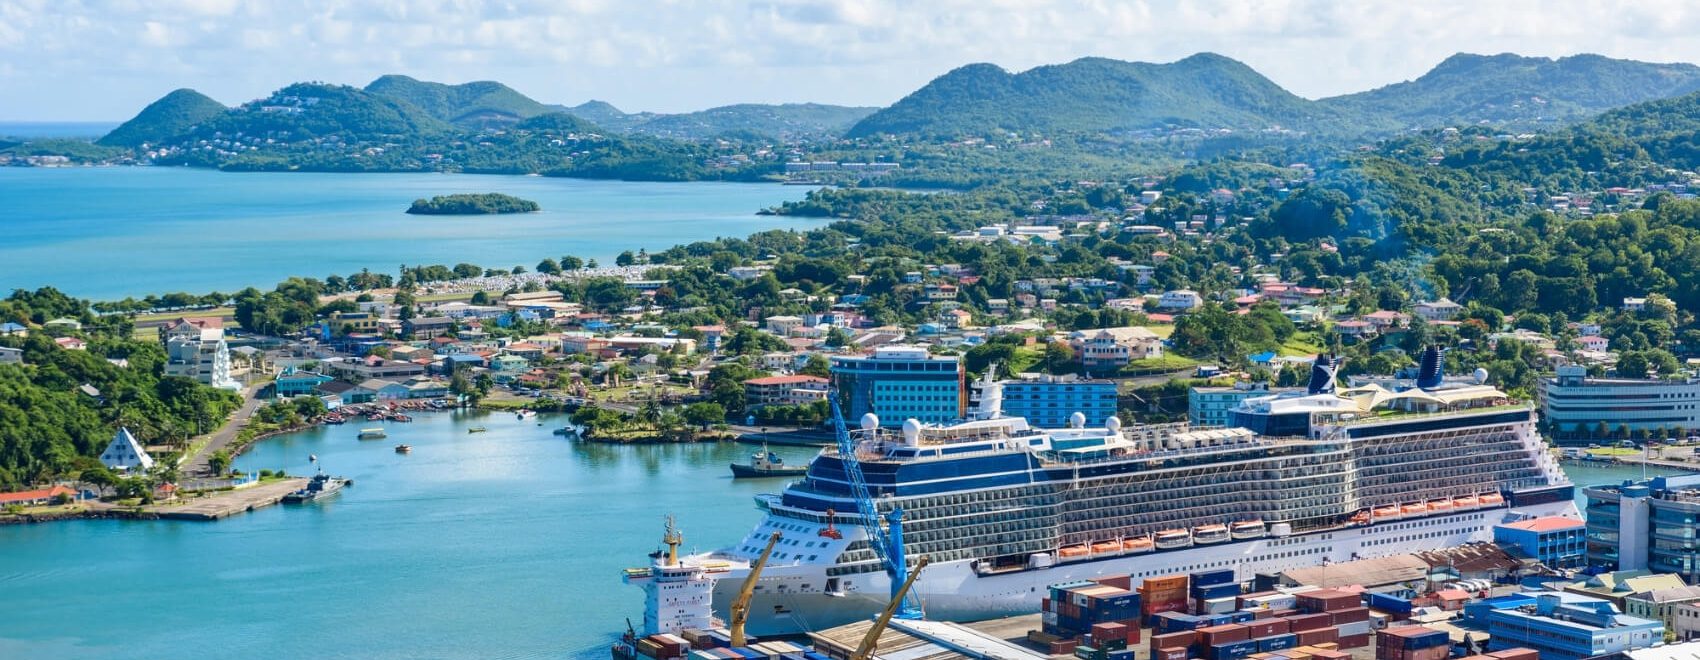 st-lucia-travel-guide-castries-harbour (1)